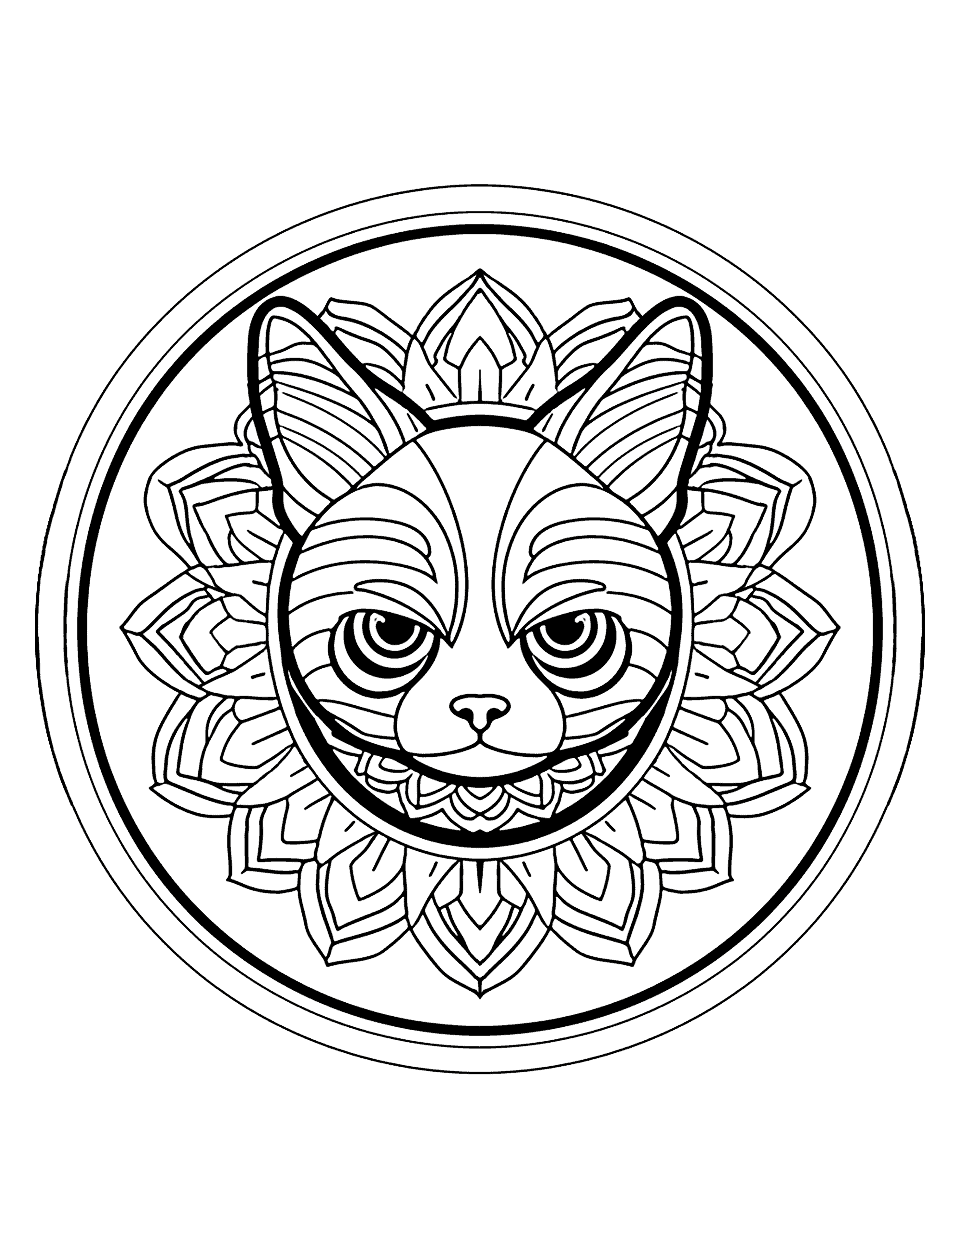 King Cat Mandala Coloring Page - A regal-looking cat wearing a crown at the center, surrounded by majestic patterns.